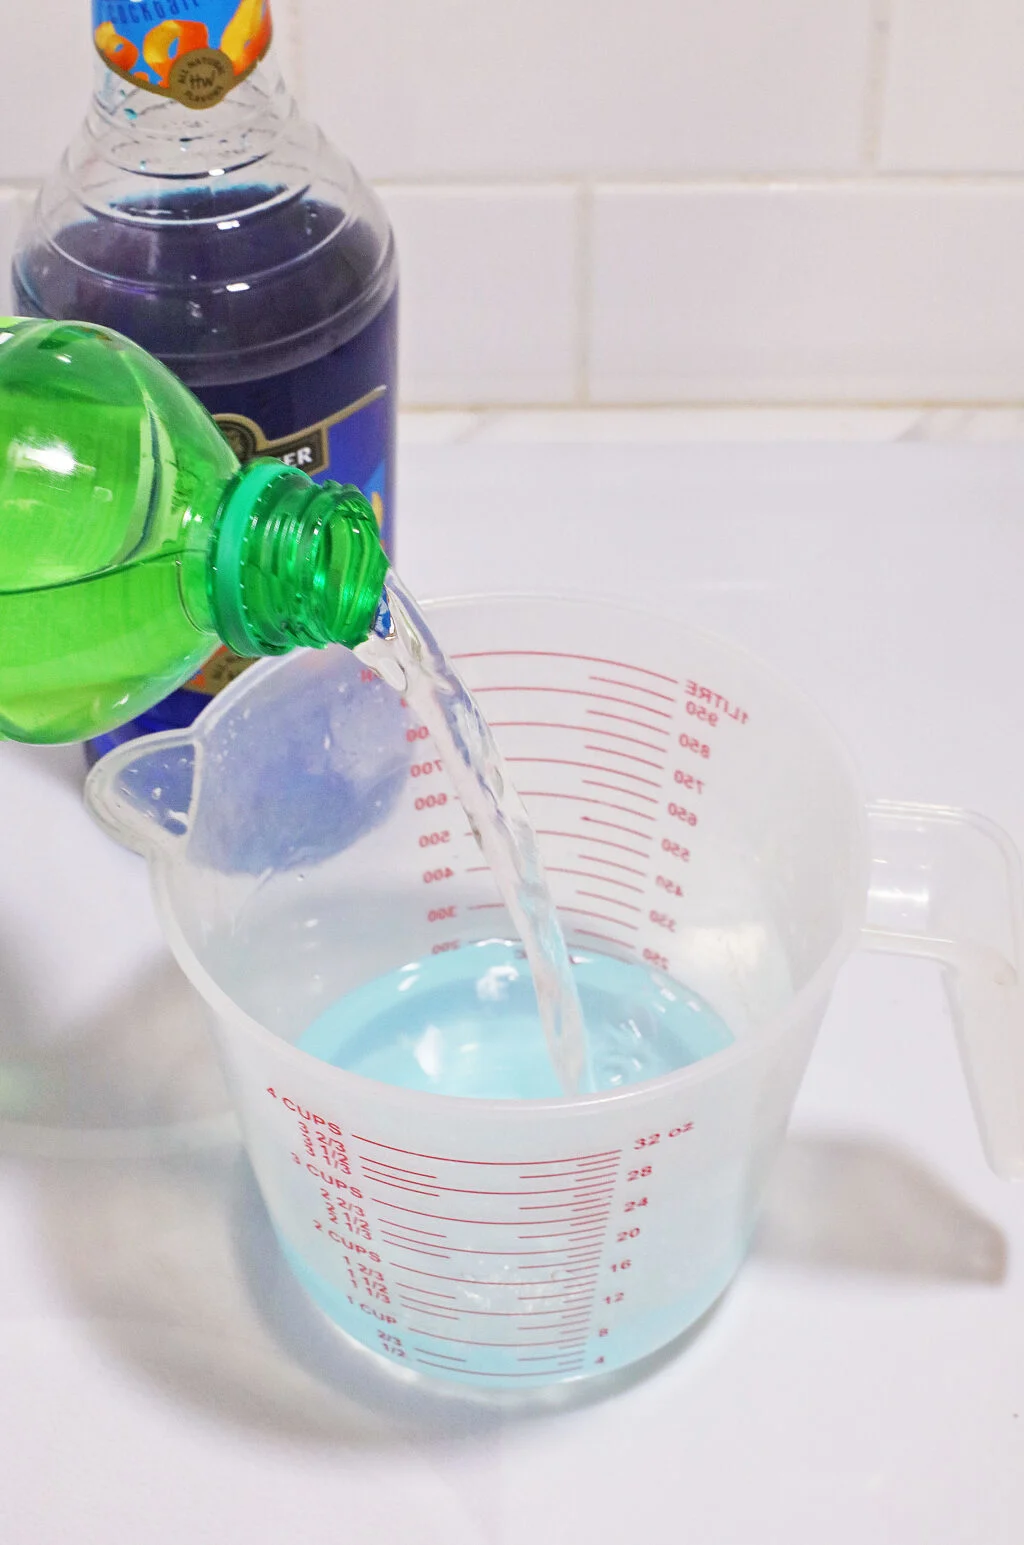 mountain dew being poured into measuring cup